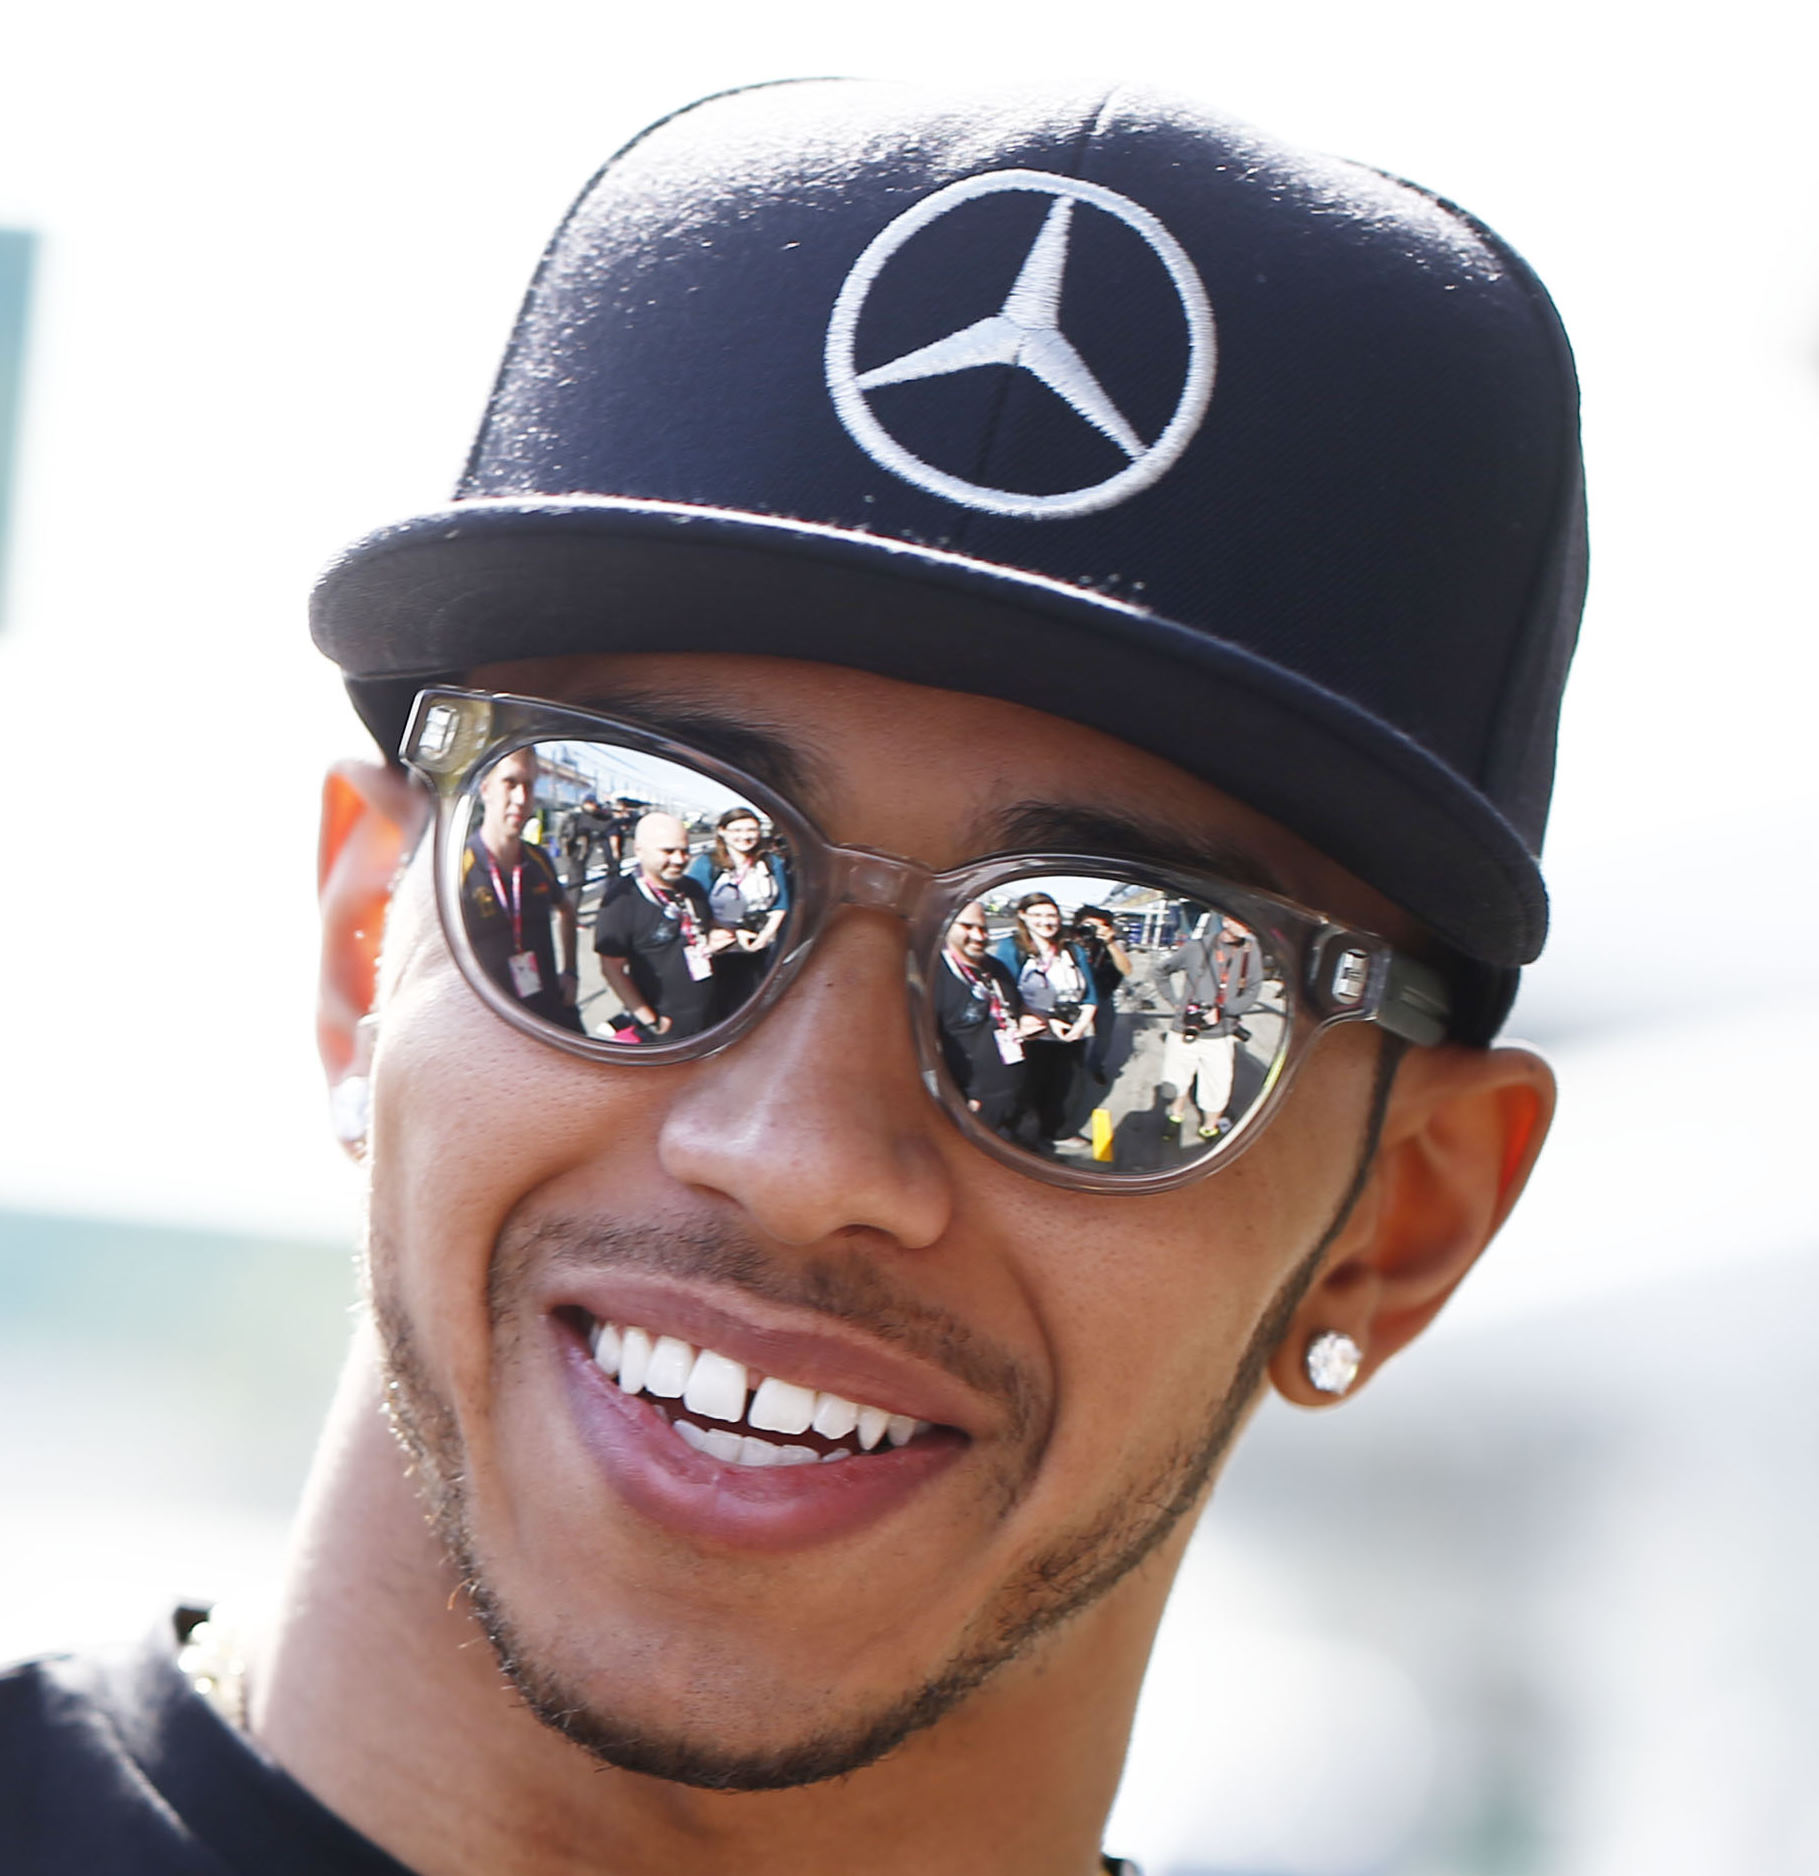 Lewis 'I am the greatest' Hamilton may find out next year that Mercedes has decided Rosberg will win the F1 title